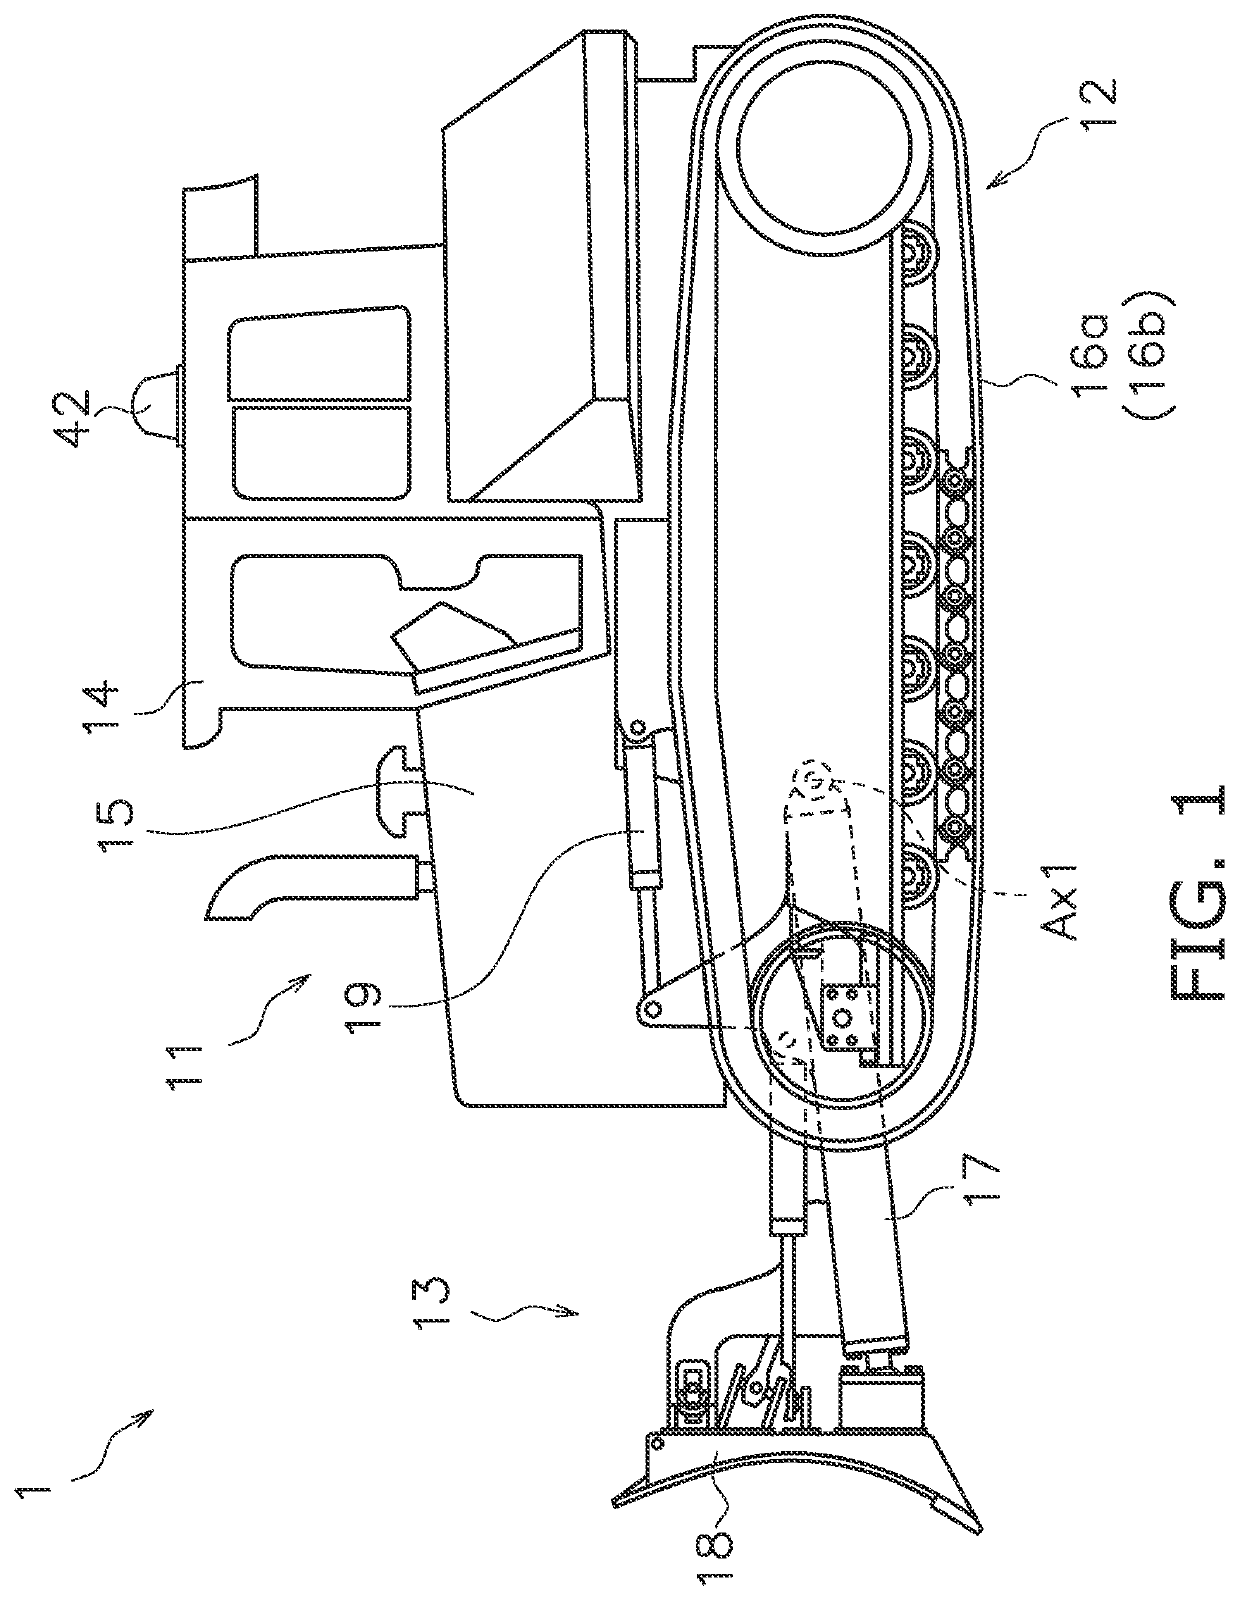 System, method and device for calibrating work machine